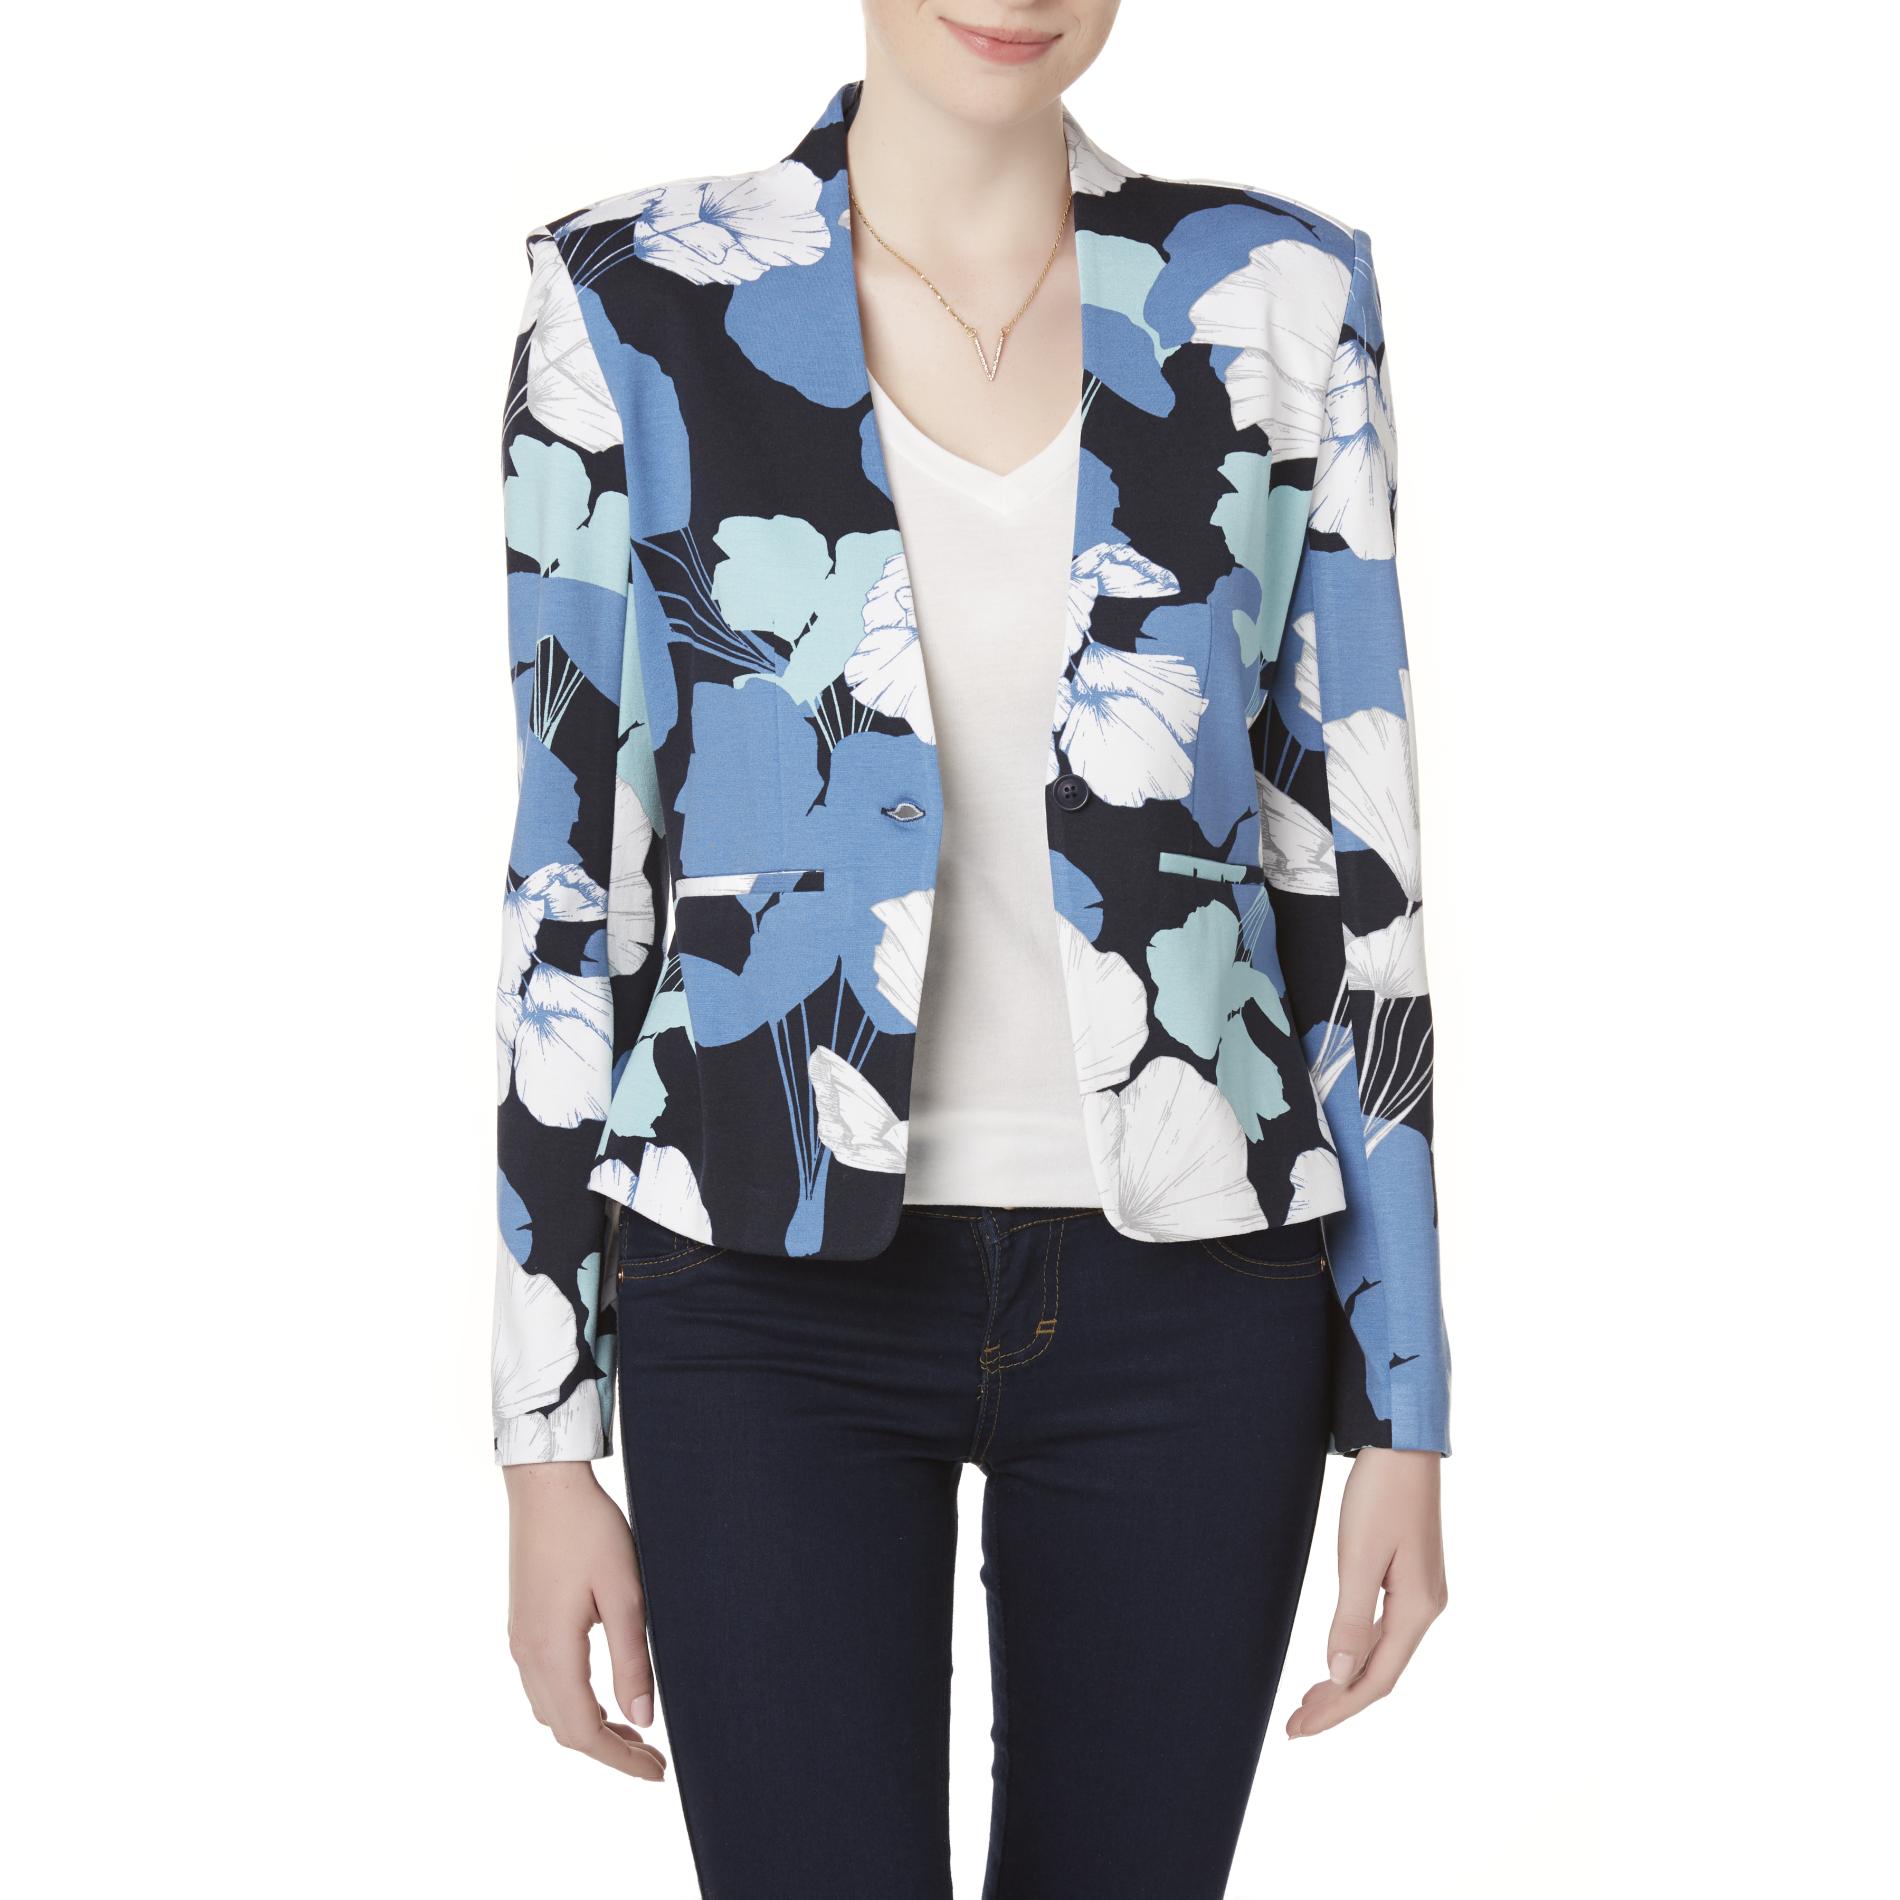 Simply Styled Petites' Ponte Knit Jacket - Floral